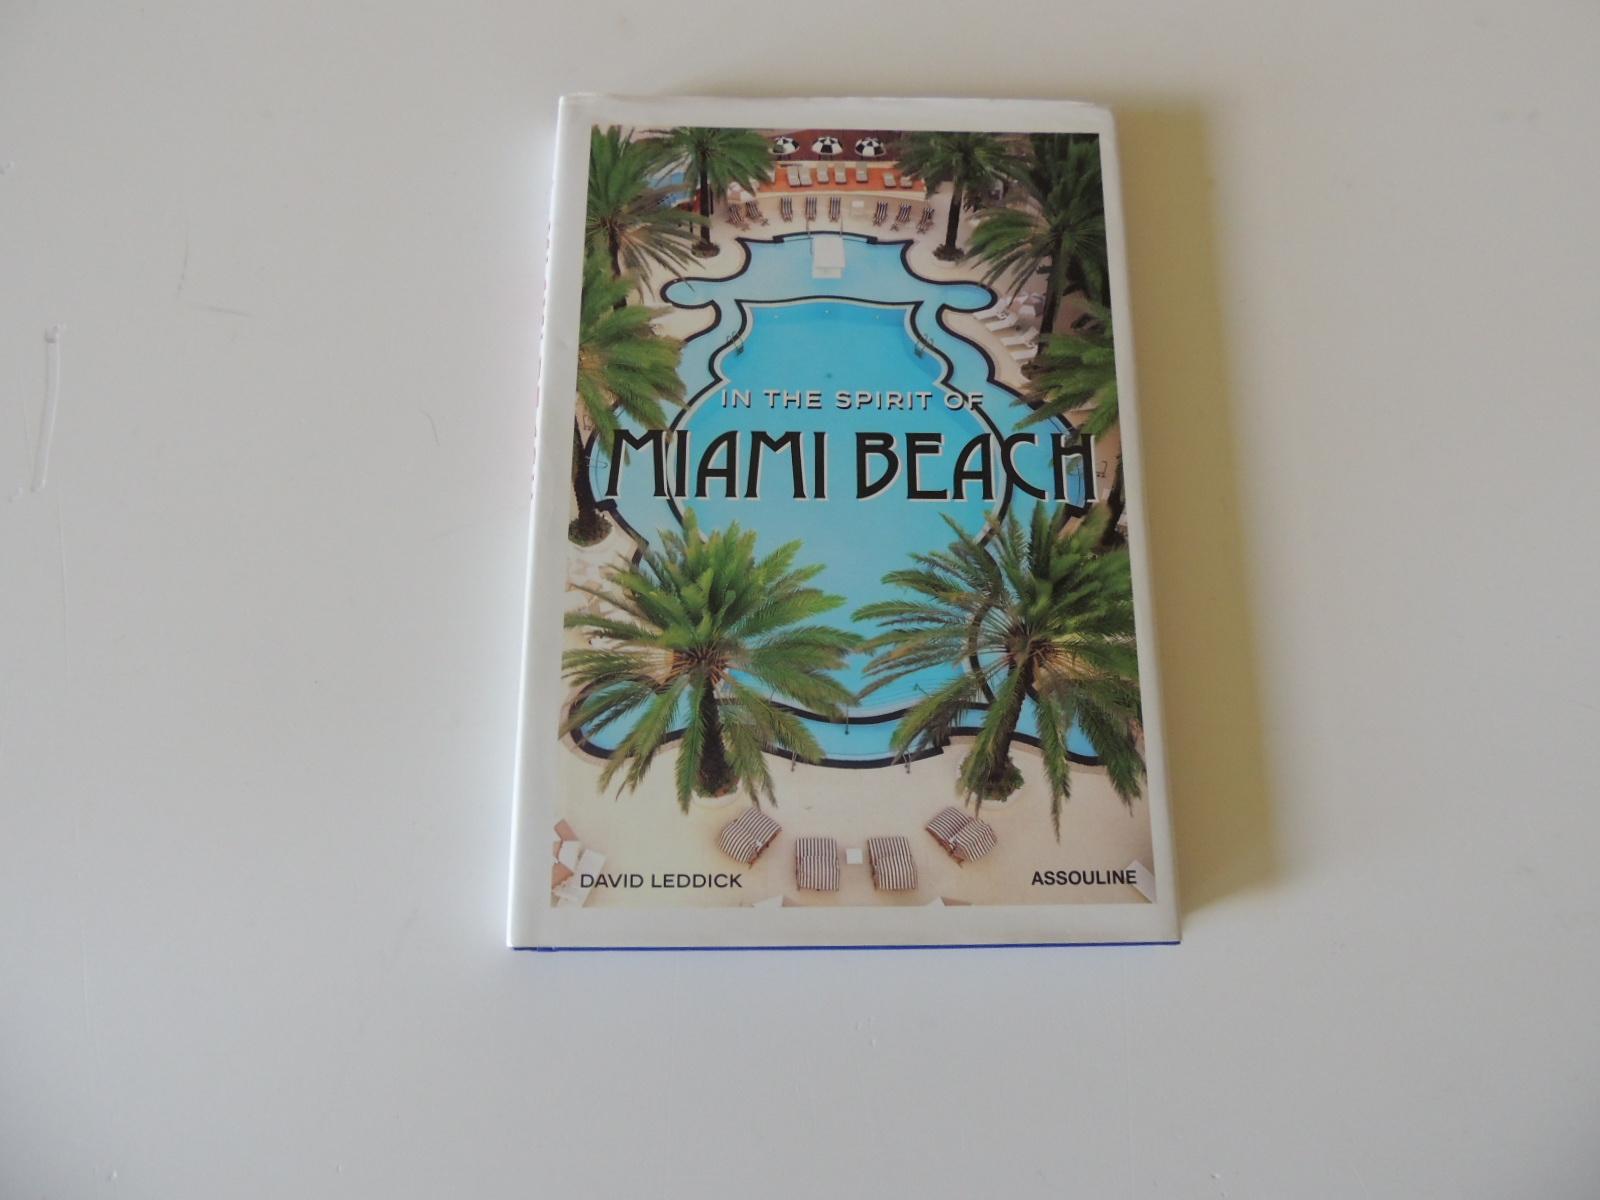 Vintage Book in the Spirit of Miami
What Venice was to the world during the Renaissance era, so Miami is to the world today. An active melting pot of cultures; where Art Deco contends with Spanish Baroque; where artists mingle with athletes, models,